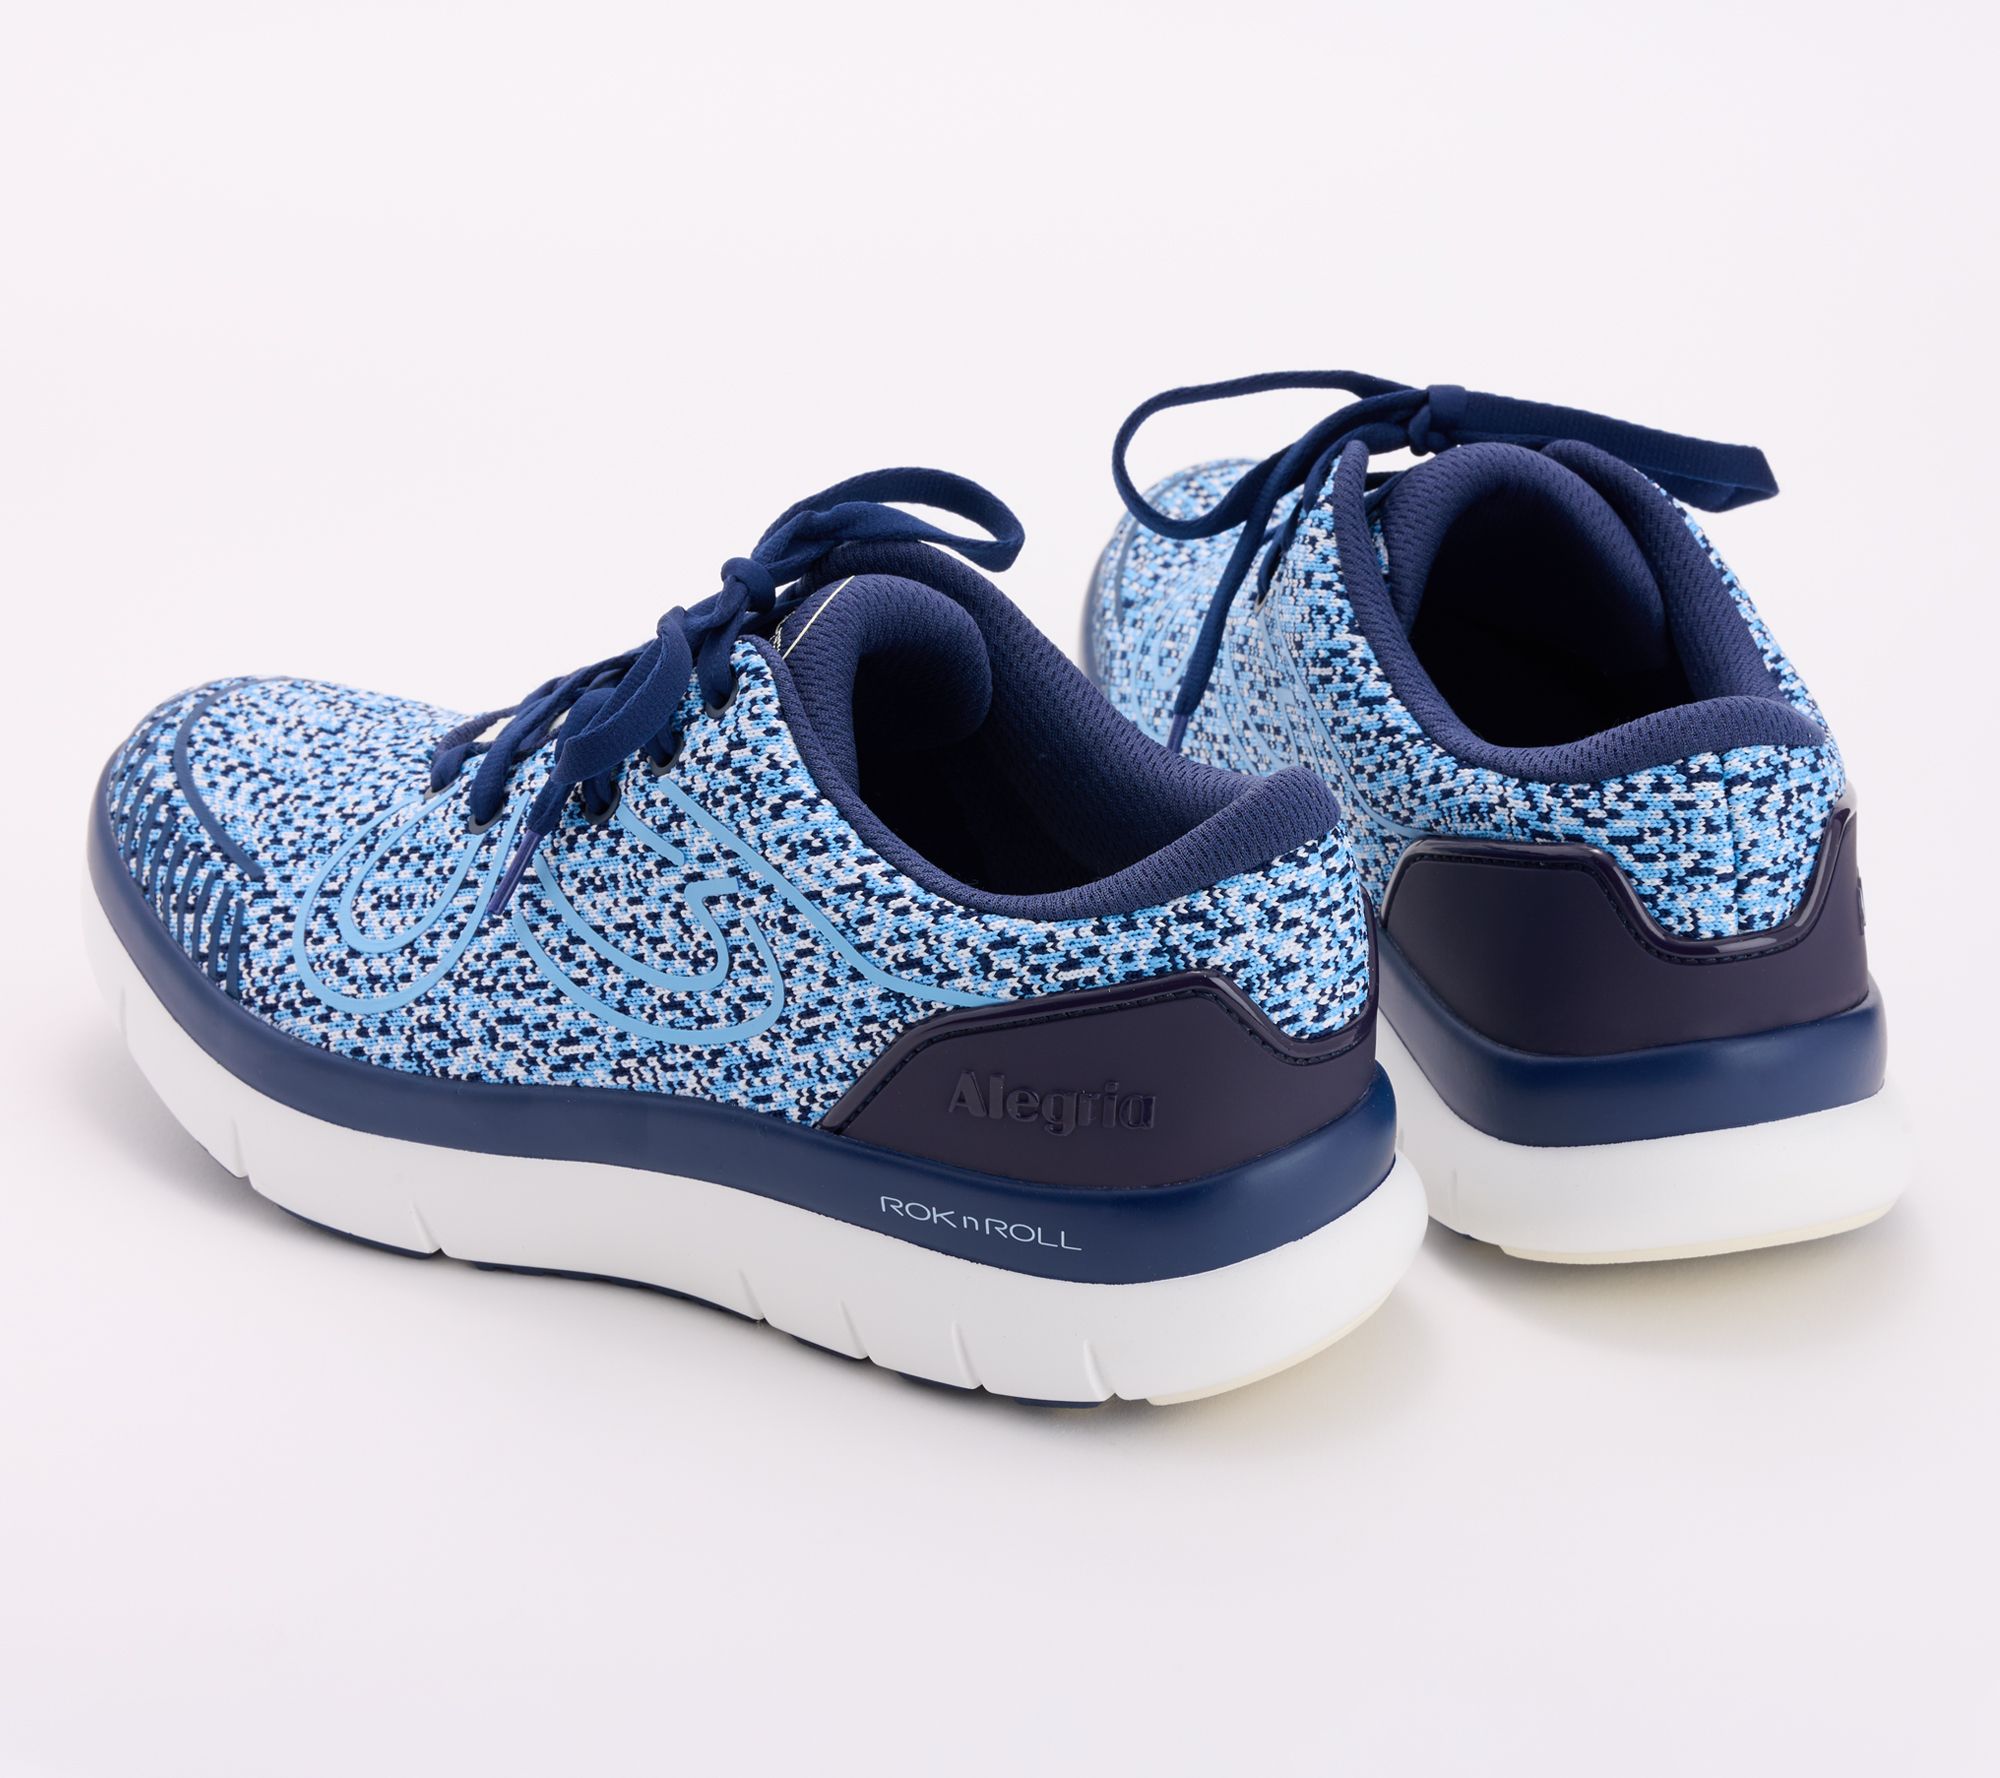 Alegria Mesh Lace-Up Sneakers - Roll On 2 - QVC.com